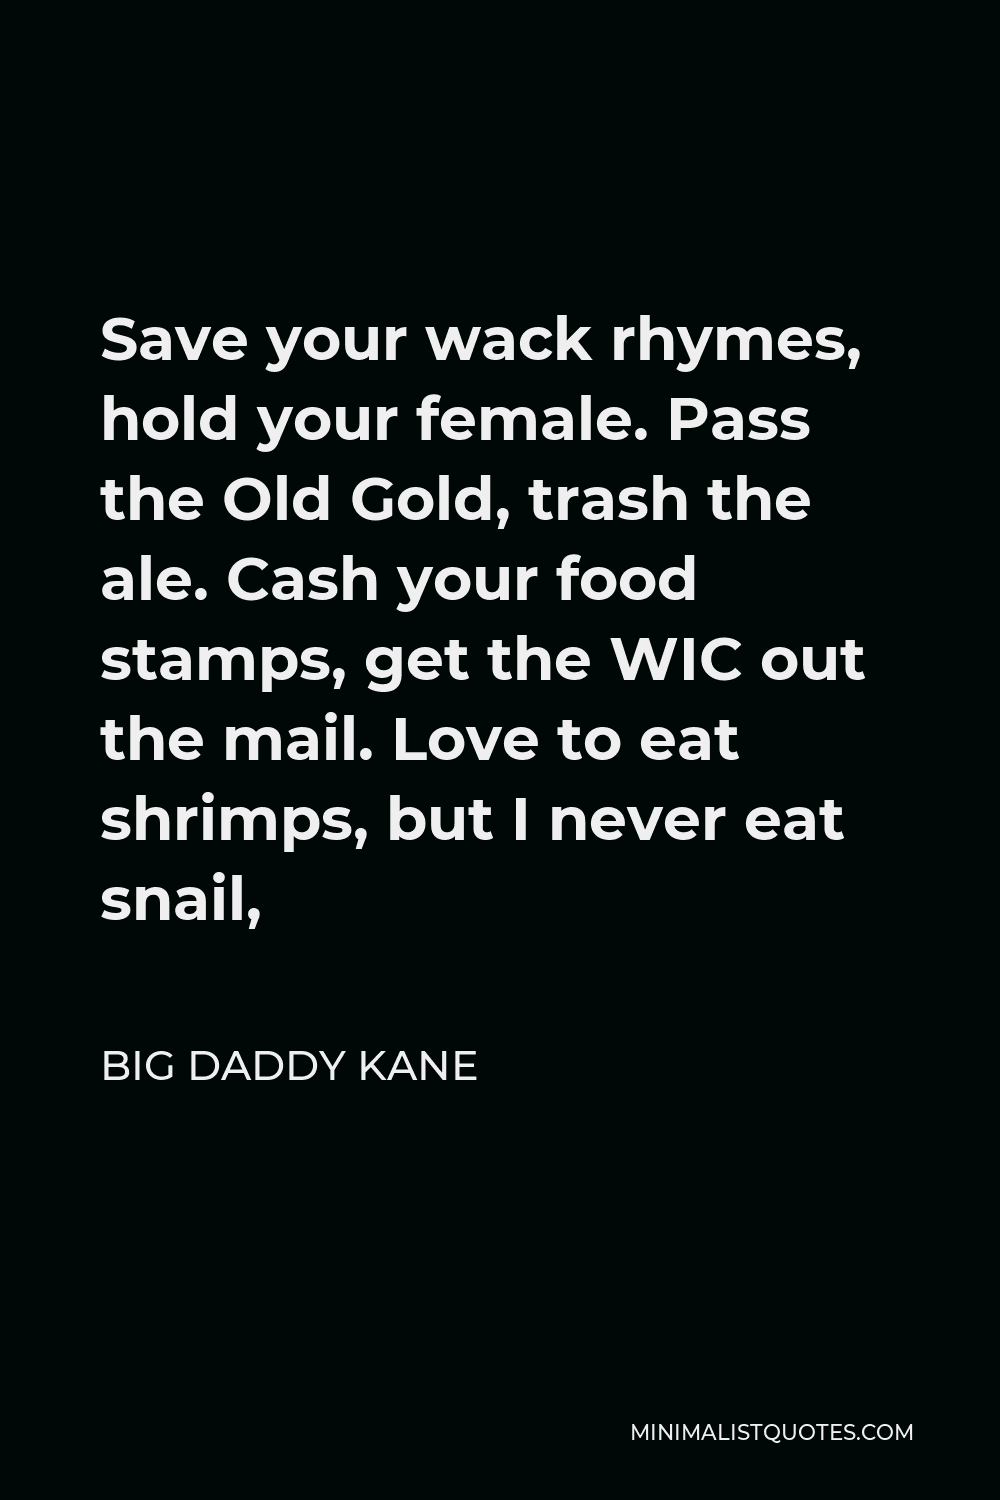 Big Daddy Kane Quote - Save your wack rhymes, hold your female. Pass the Old Gold, trash the ale. Cash your food stamps, get the WIC out the mail. Love to eat shrimps, but I never eat snail,